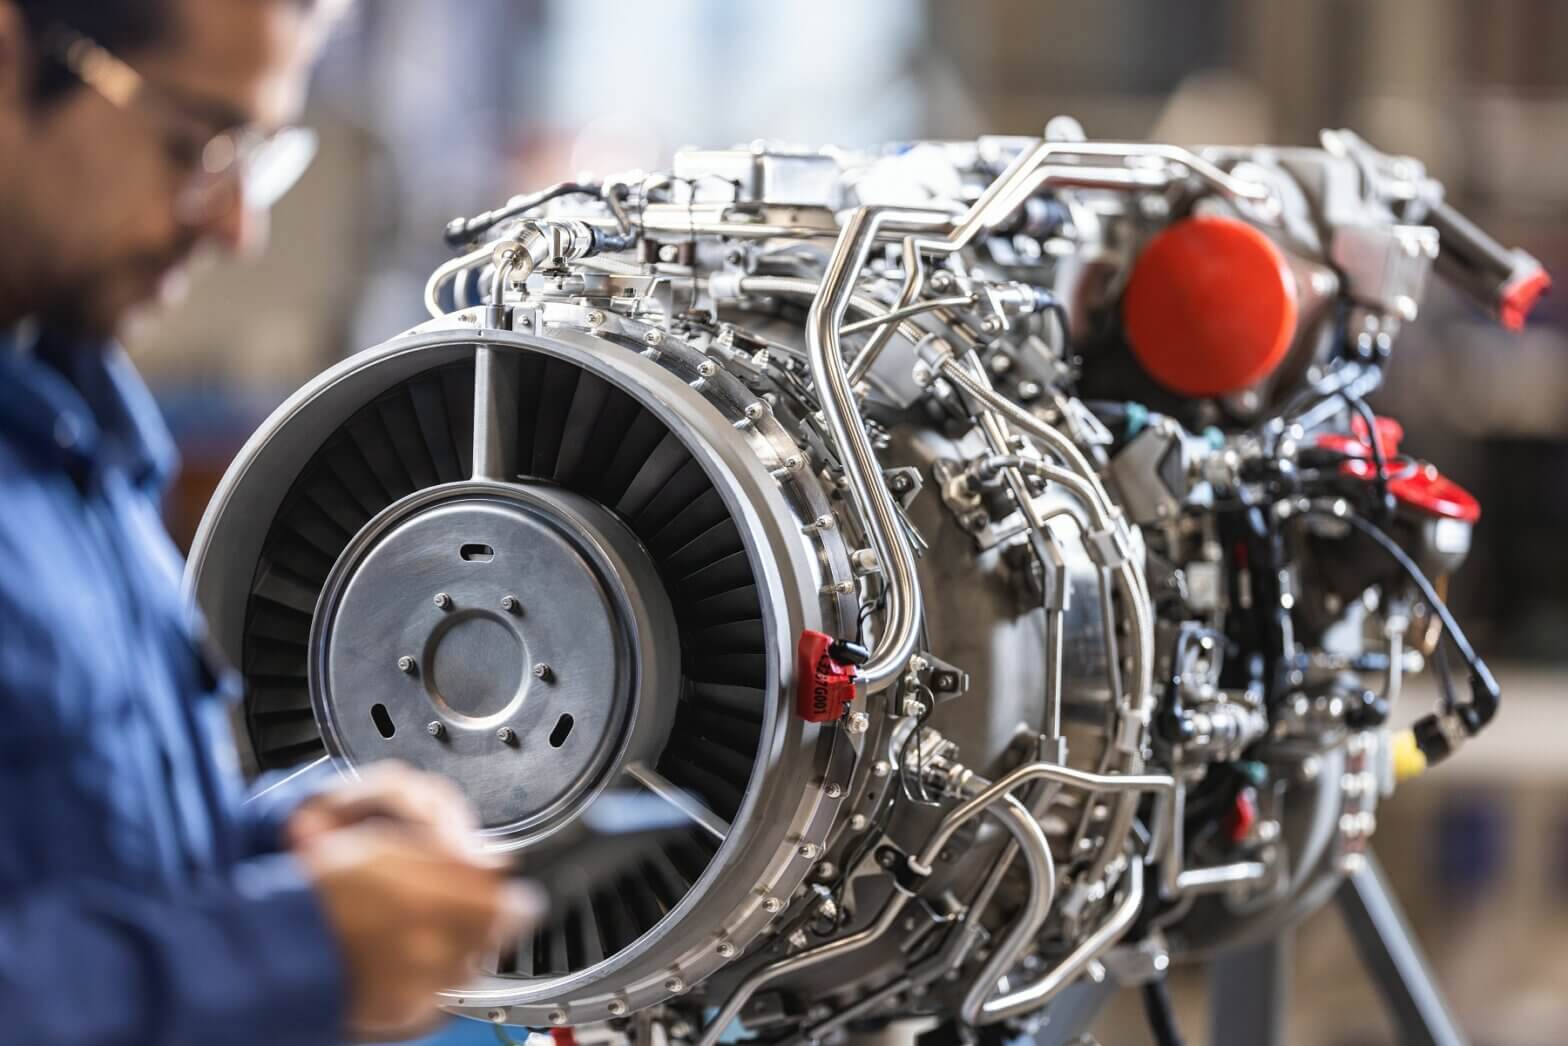 Safran’s Aneto-1K helicopter engine certified in China